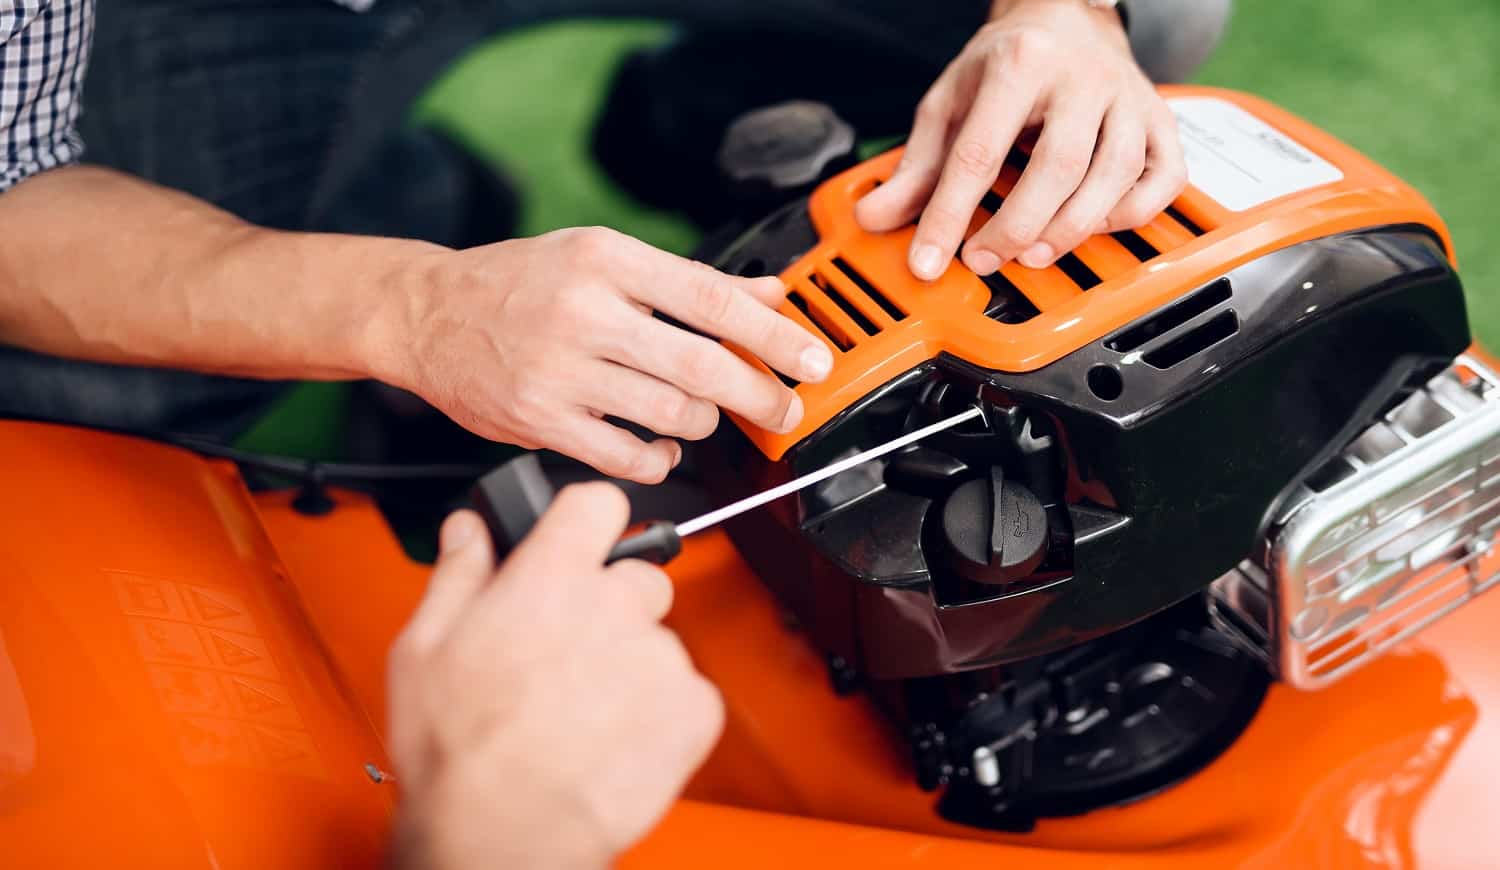 A man starts a lawnmower motor in the store.